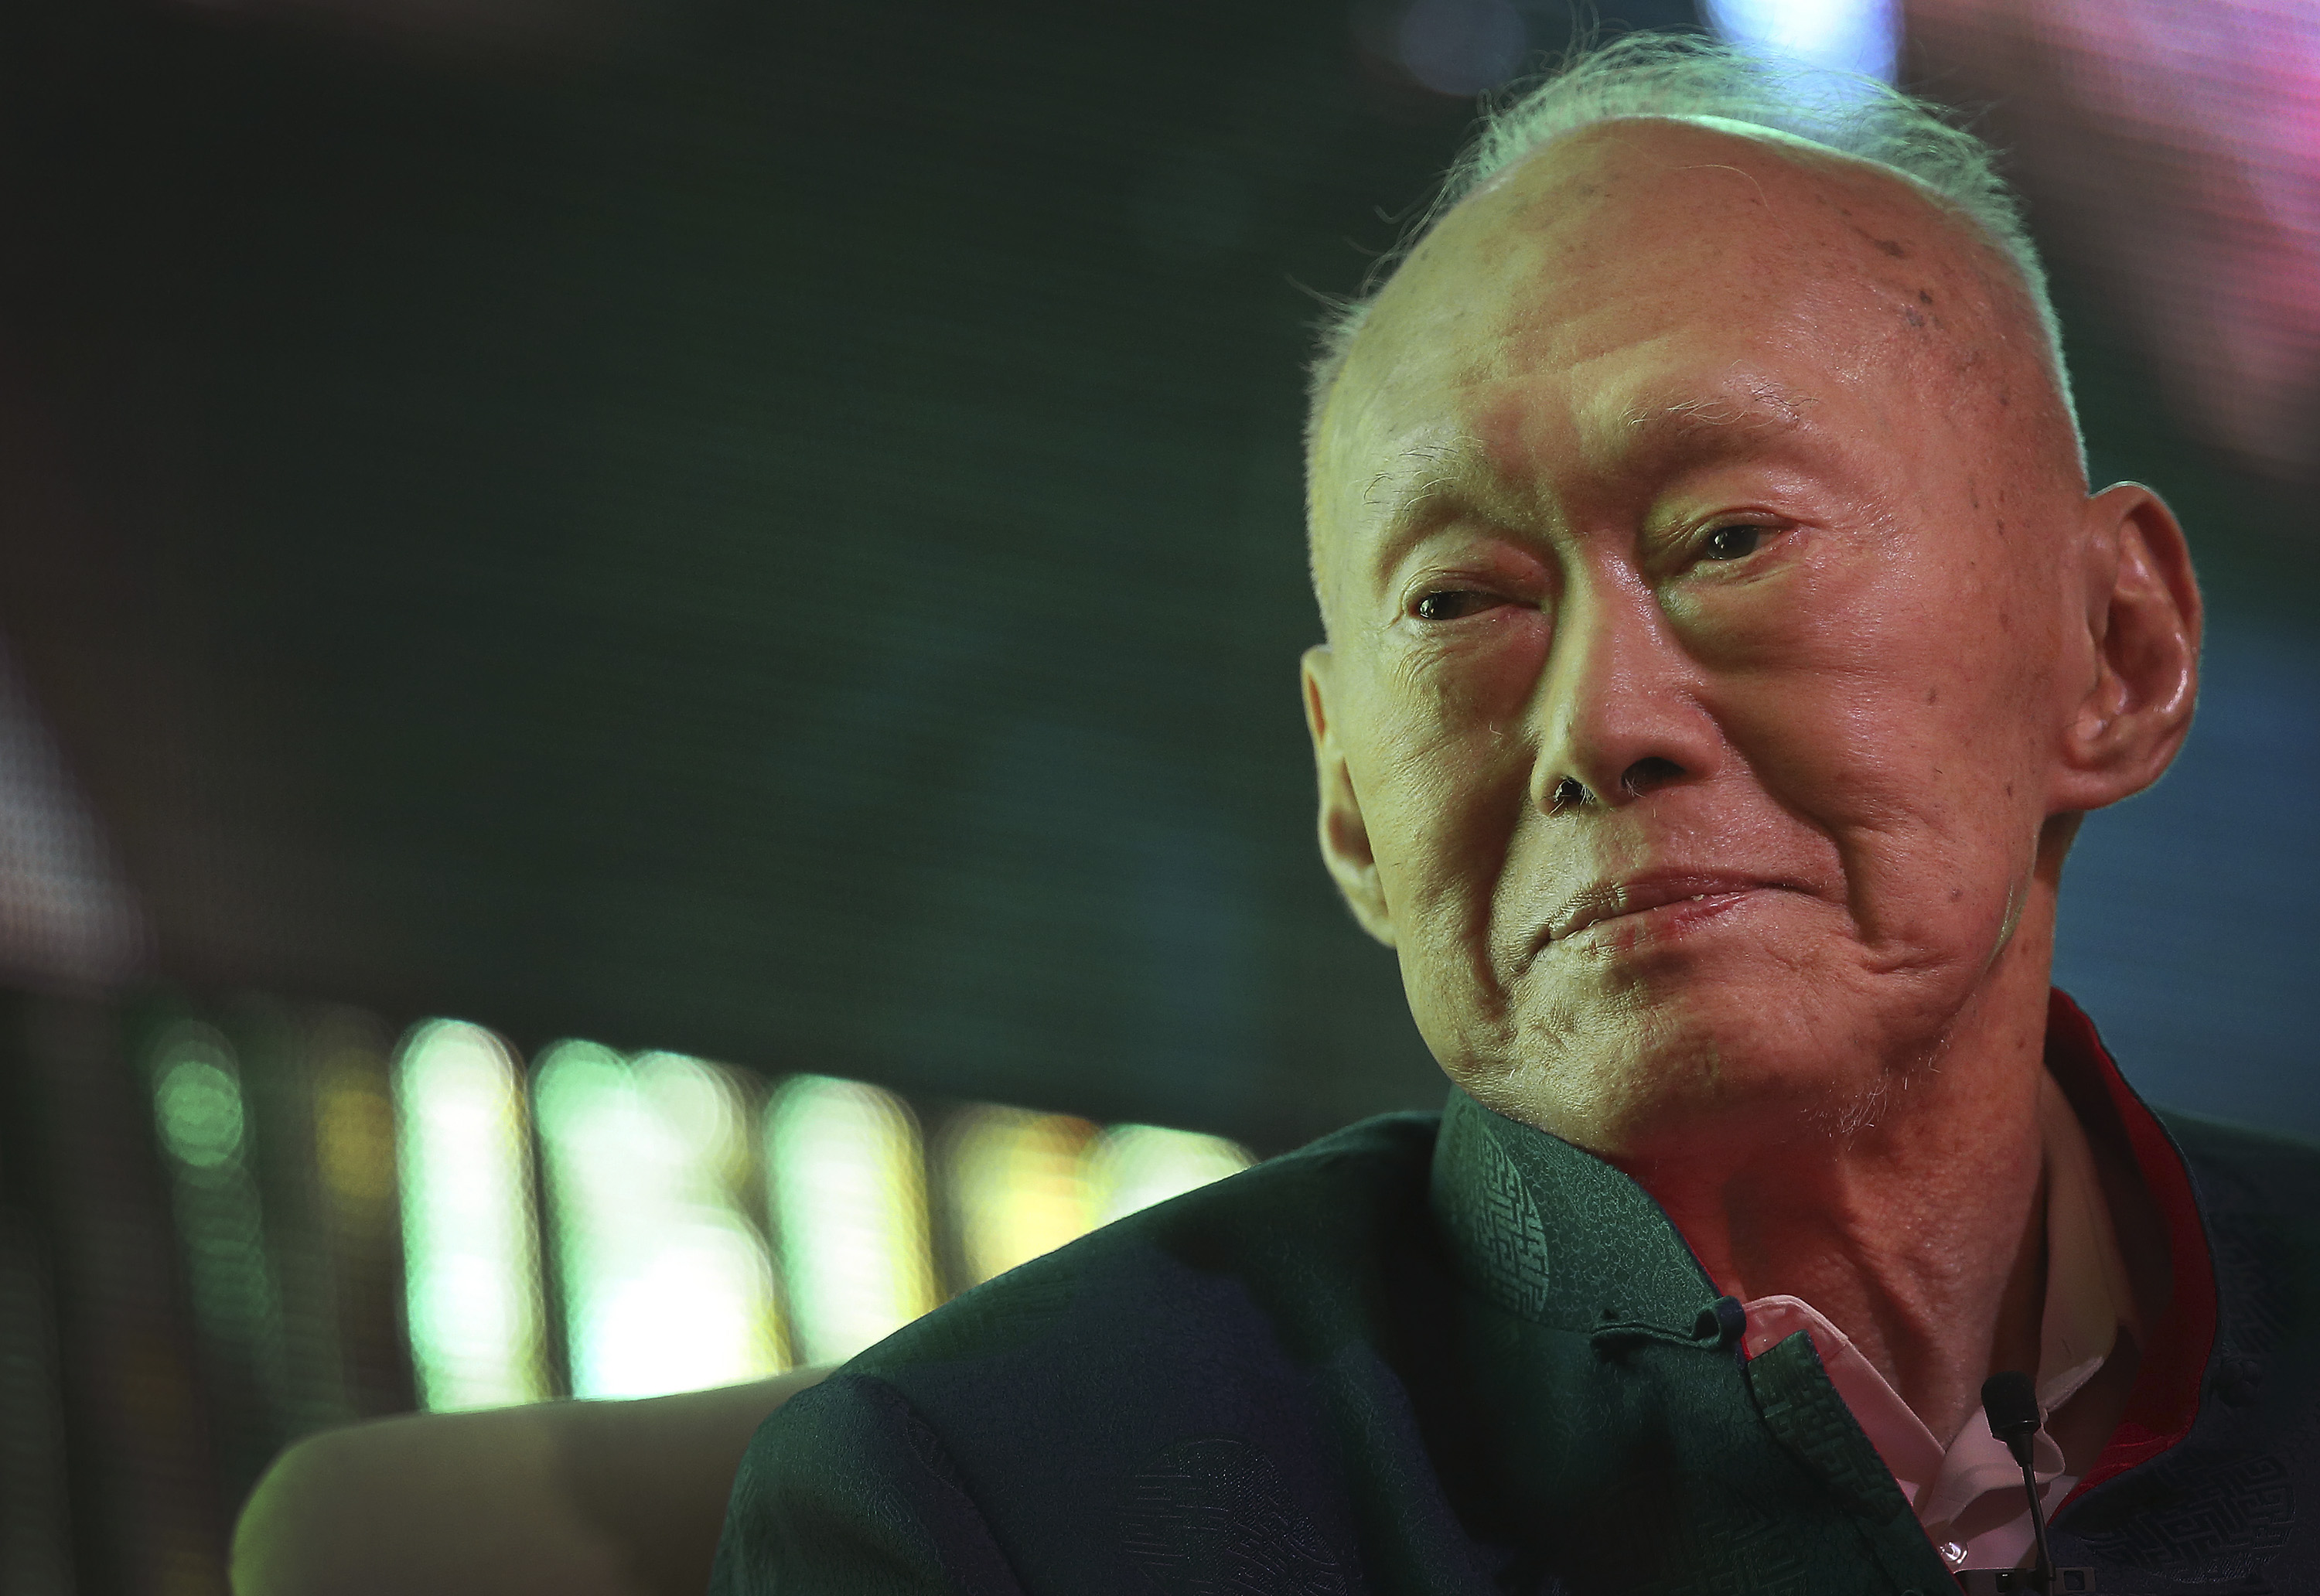 Singapore's former Prime Minister Lee Kuan Yew, March 20, 2013 in Singapore (Wong Maye-E—AP)